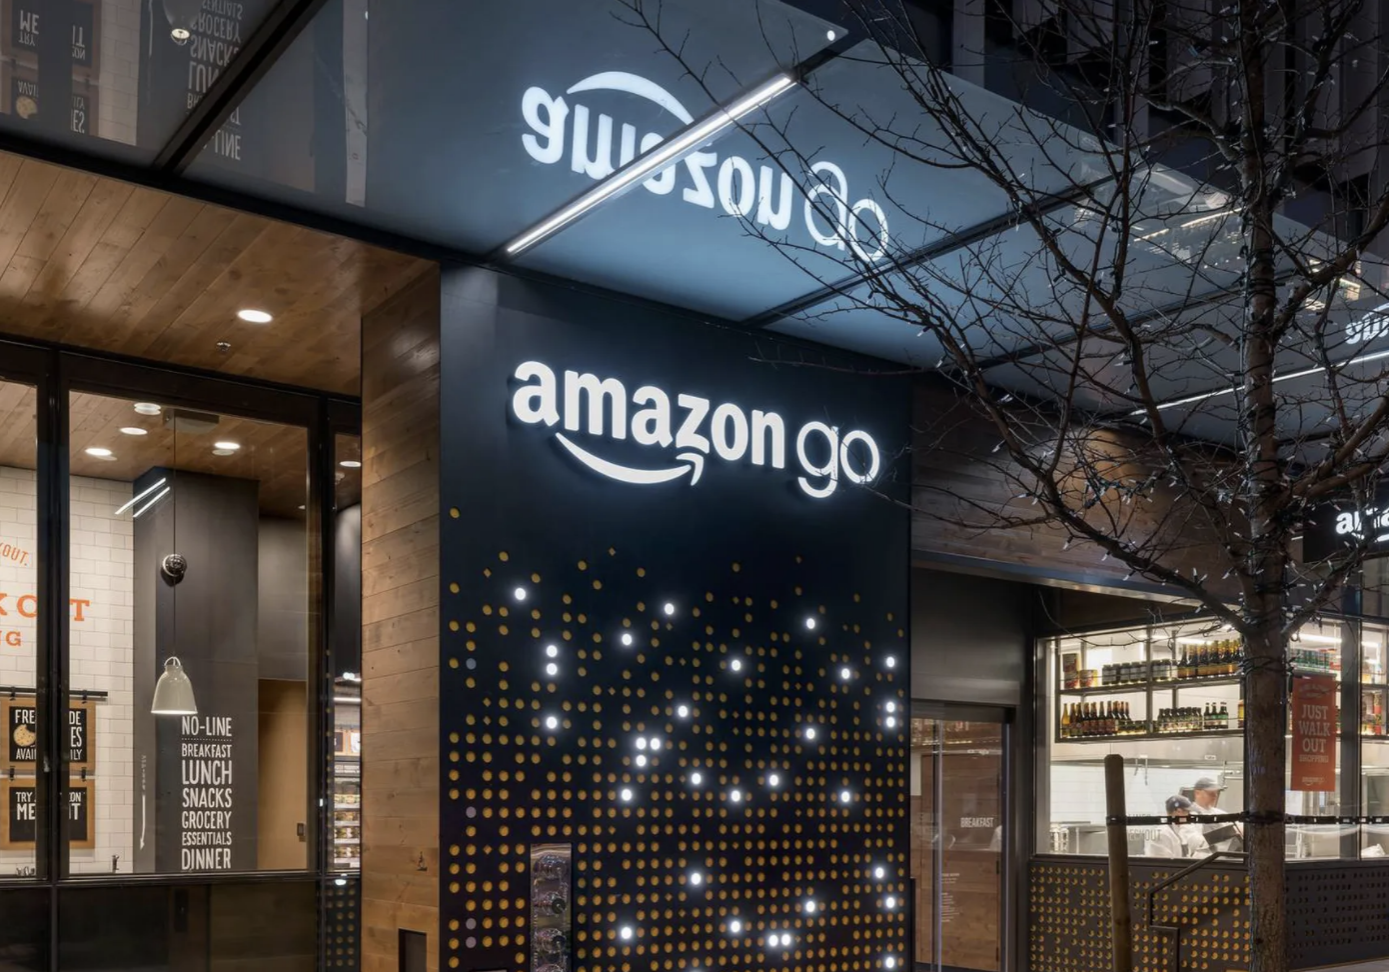 A storefront of an Amazon go store showing the logo